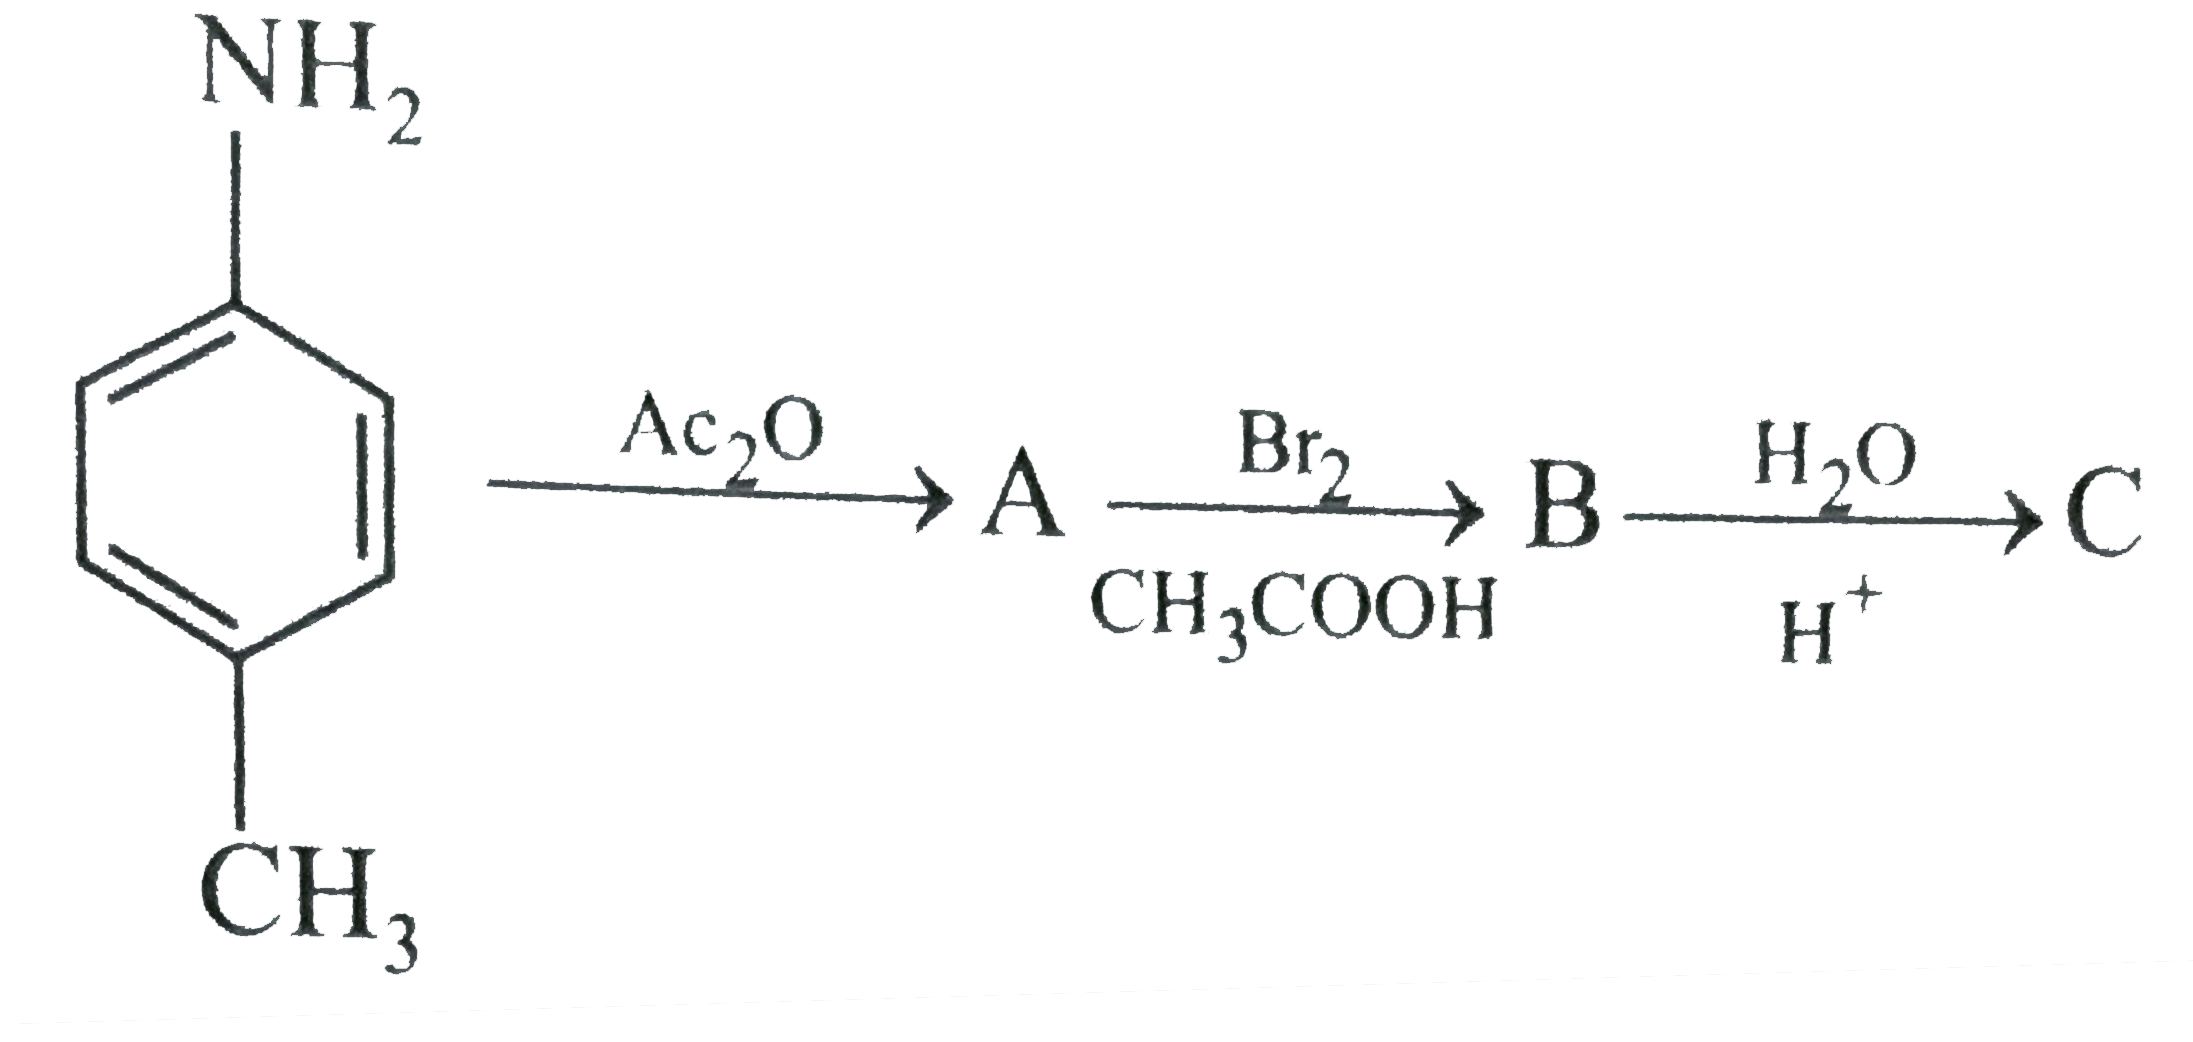 The final product C, obtained in this reaction